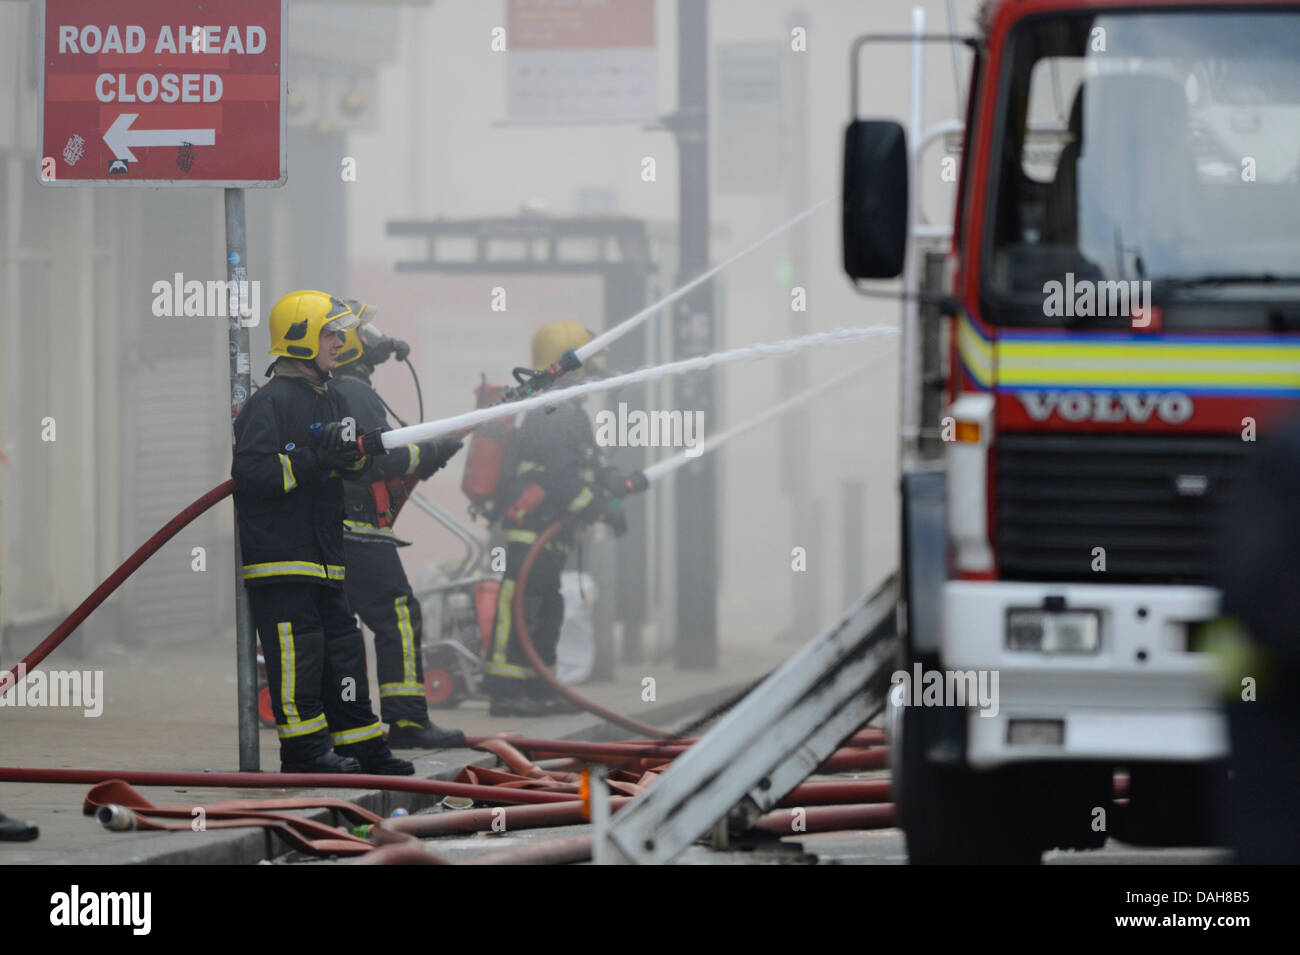 Manchester, UK. 13th July, 2013. Firefighters tackle a blaze at Paul's Hair World and NQ Life music venue on Oldham Street in the Northern Quarter area of Manchester. firefighter Stephen Hunt, 38, died tackling the fire. Two teenage girls have been arrested on suspicion of manslaughter in connection with the fire. Credit:  Russell Hart/Alamy Live News (Editorial use only). Stock Photo